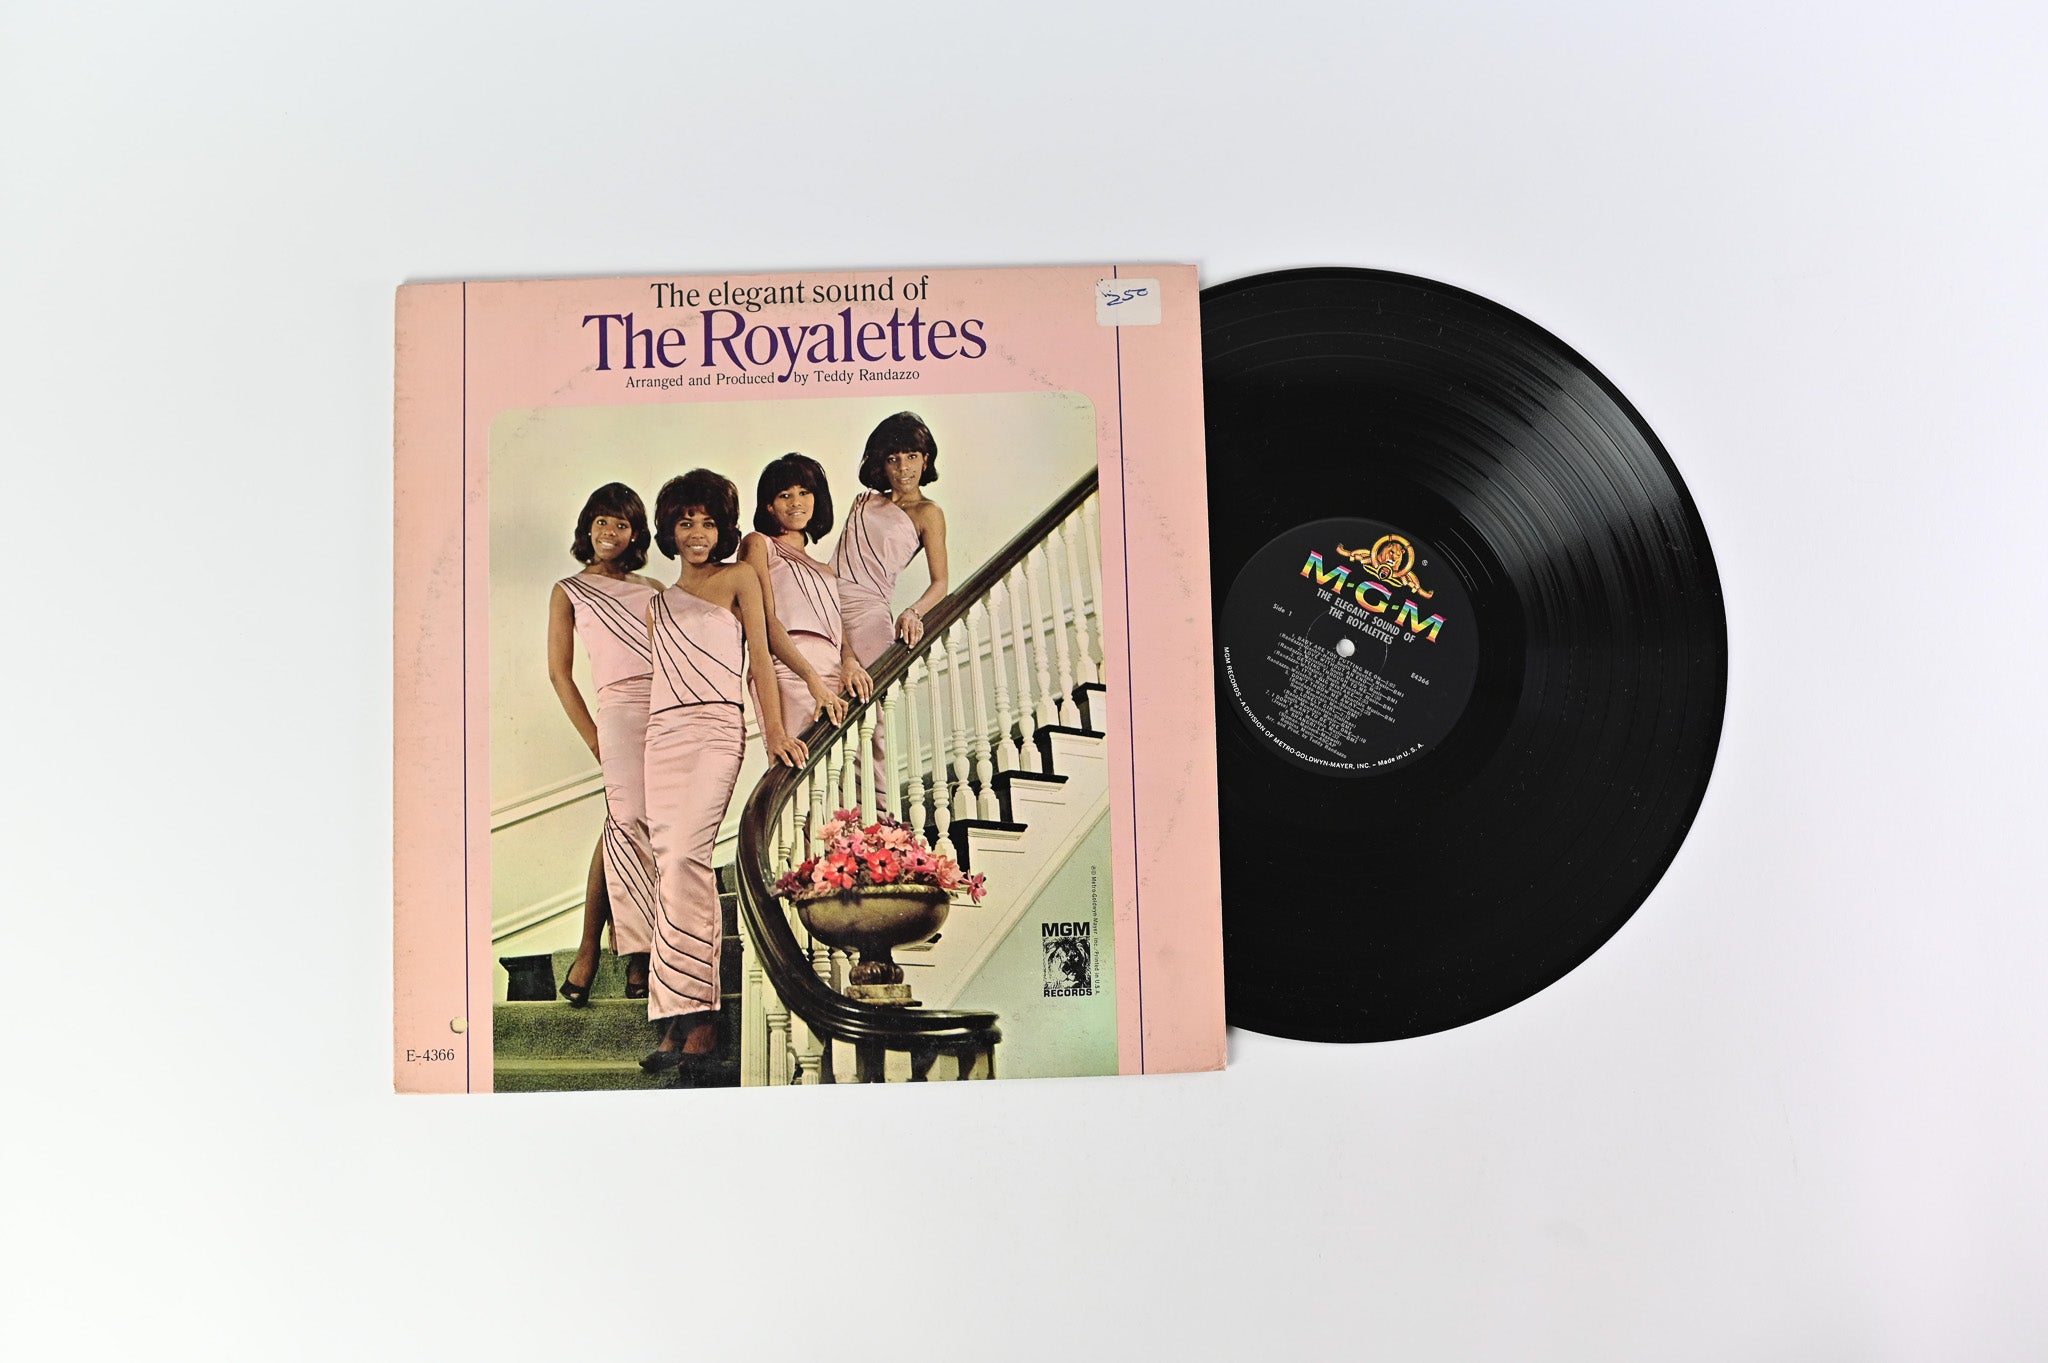 The Royalettes - The Elegant Sound Of The Royalettes on MGM Mono